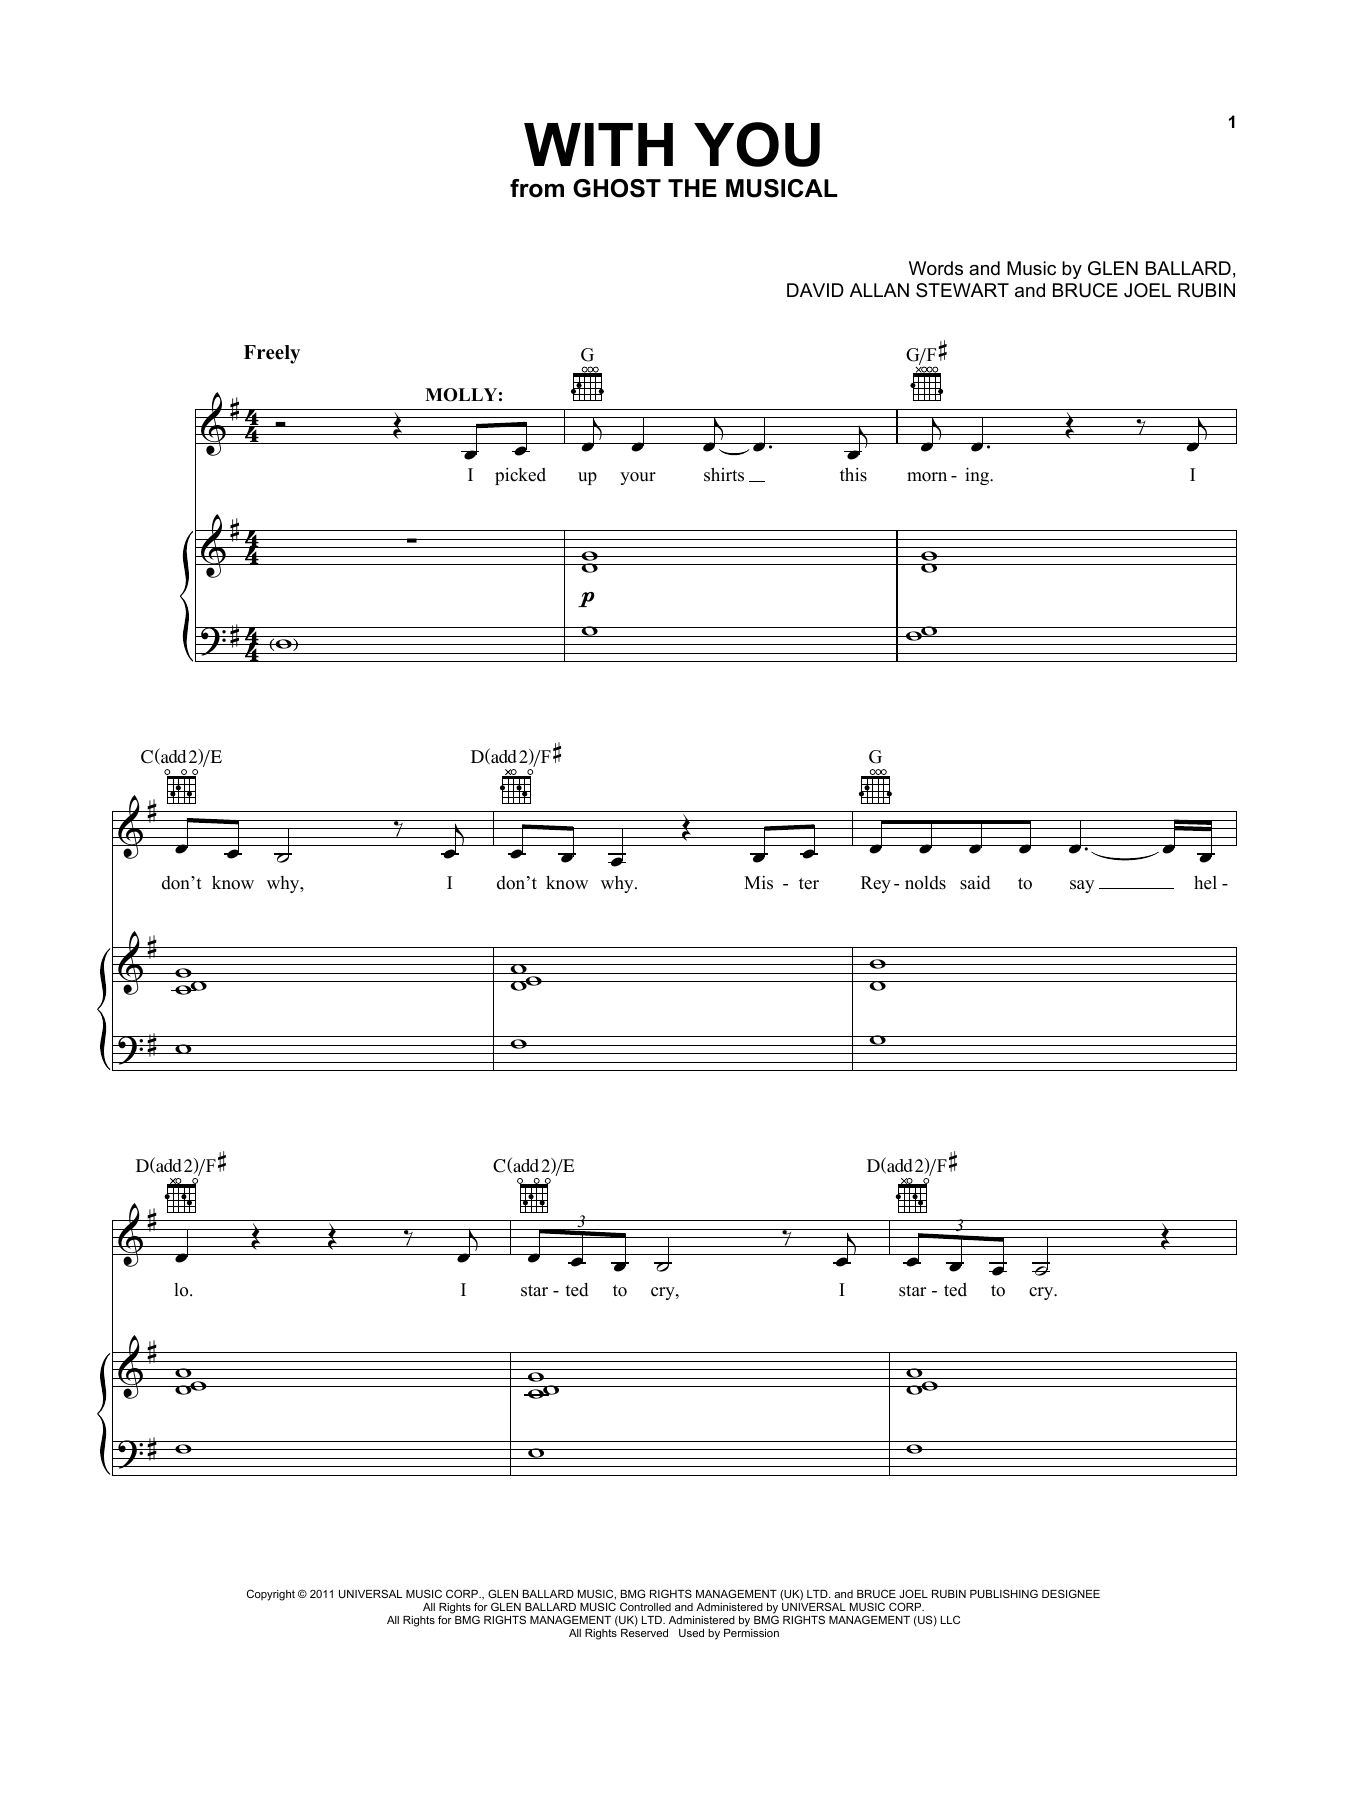 Download Glen Ballard With You (from Ghost - The Musical) Sheet Music